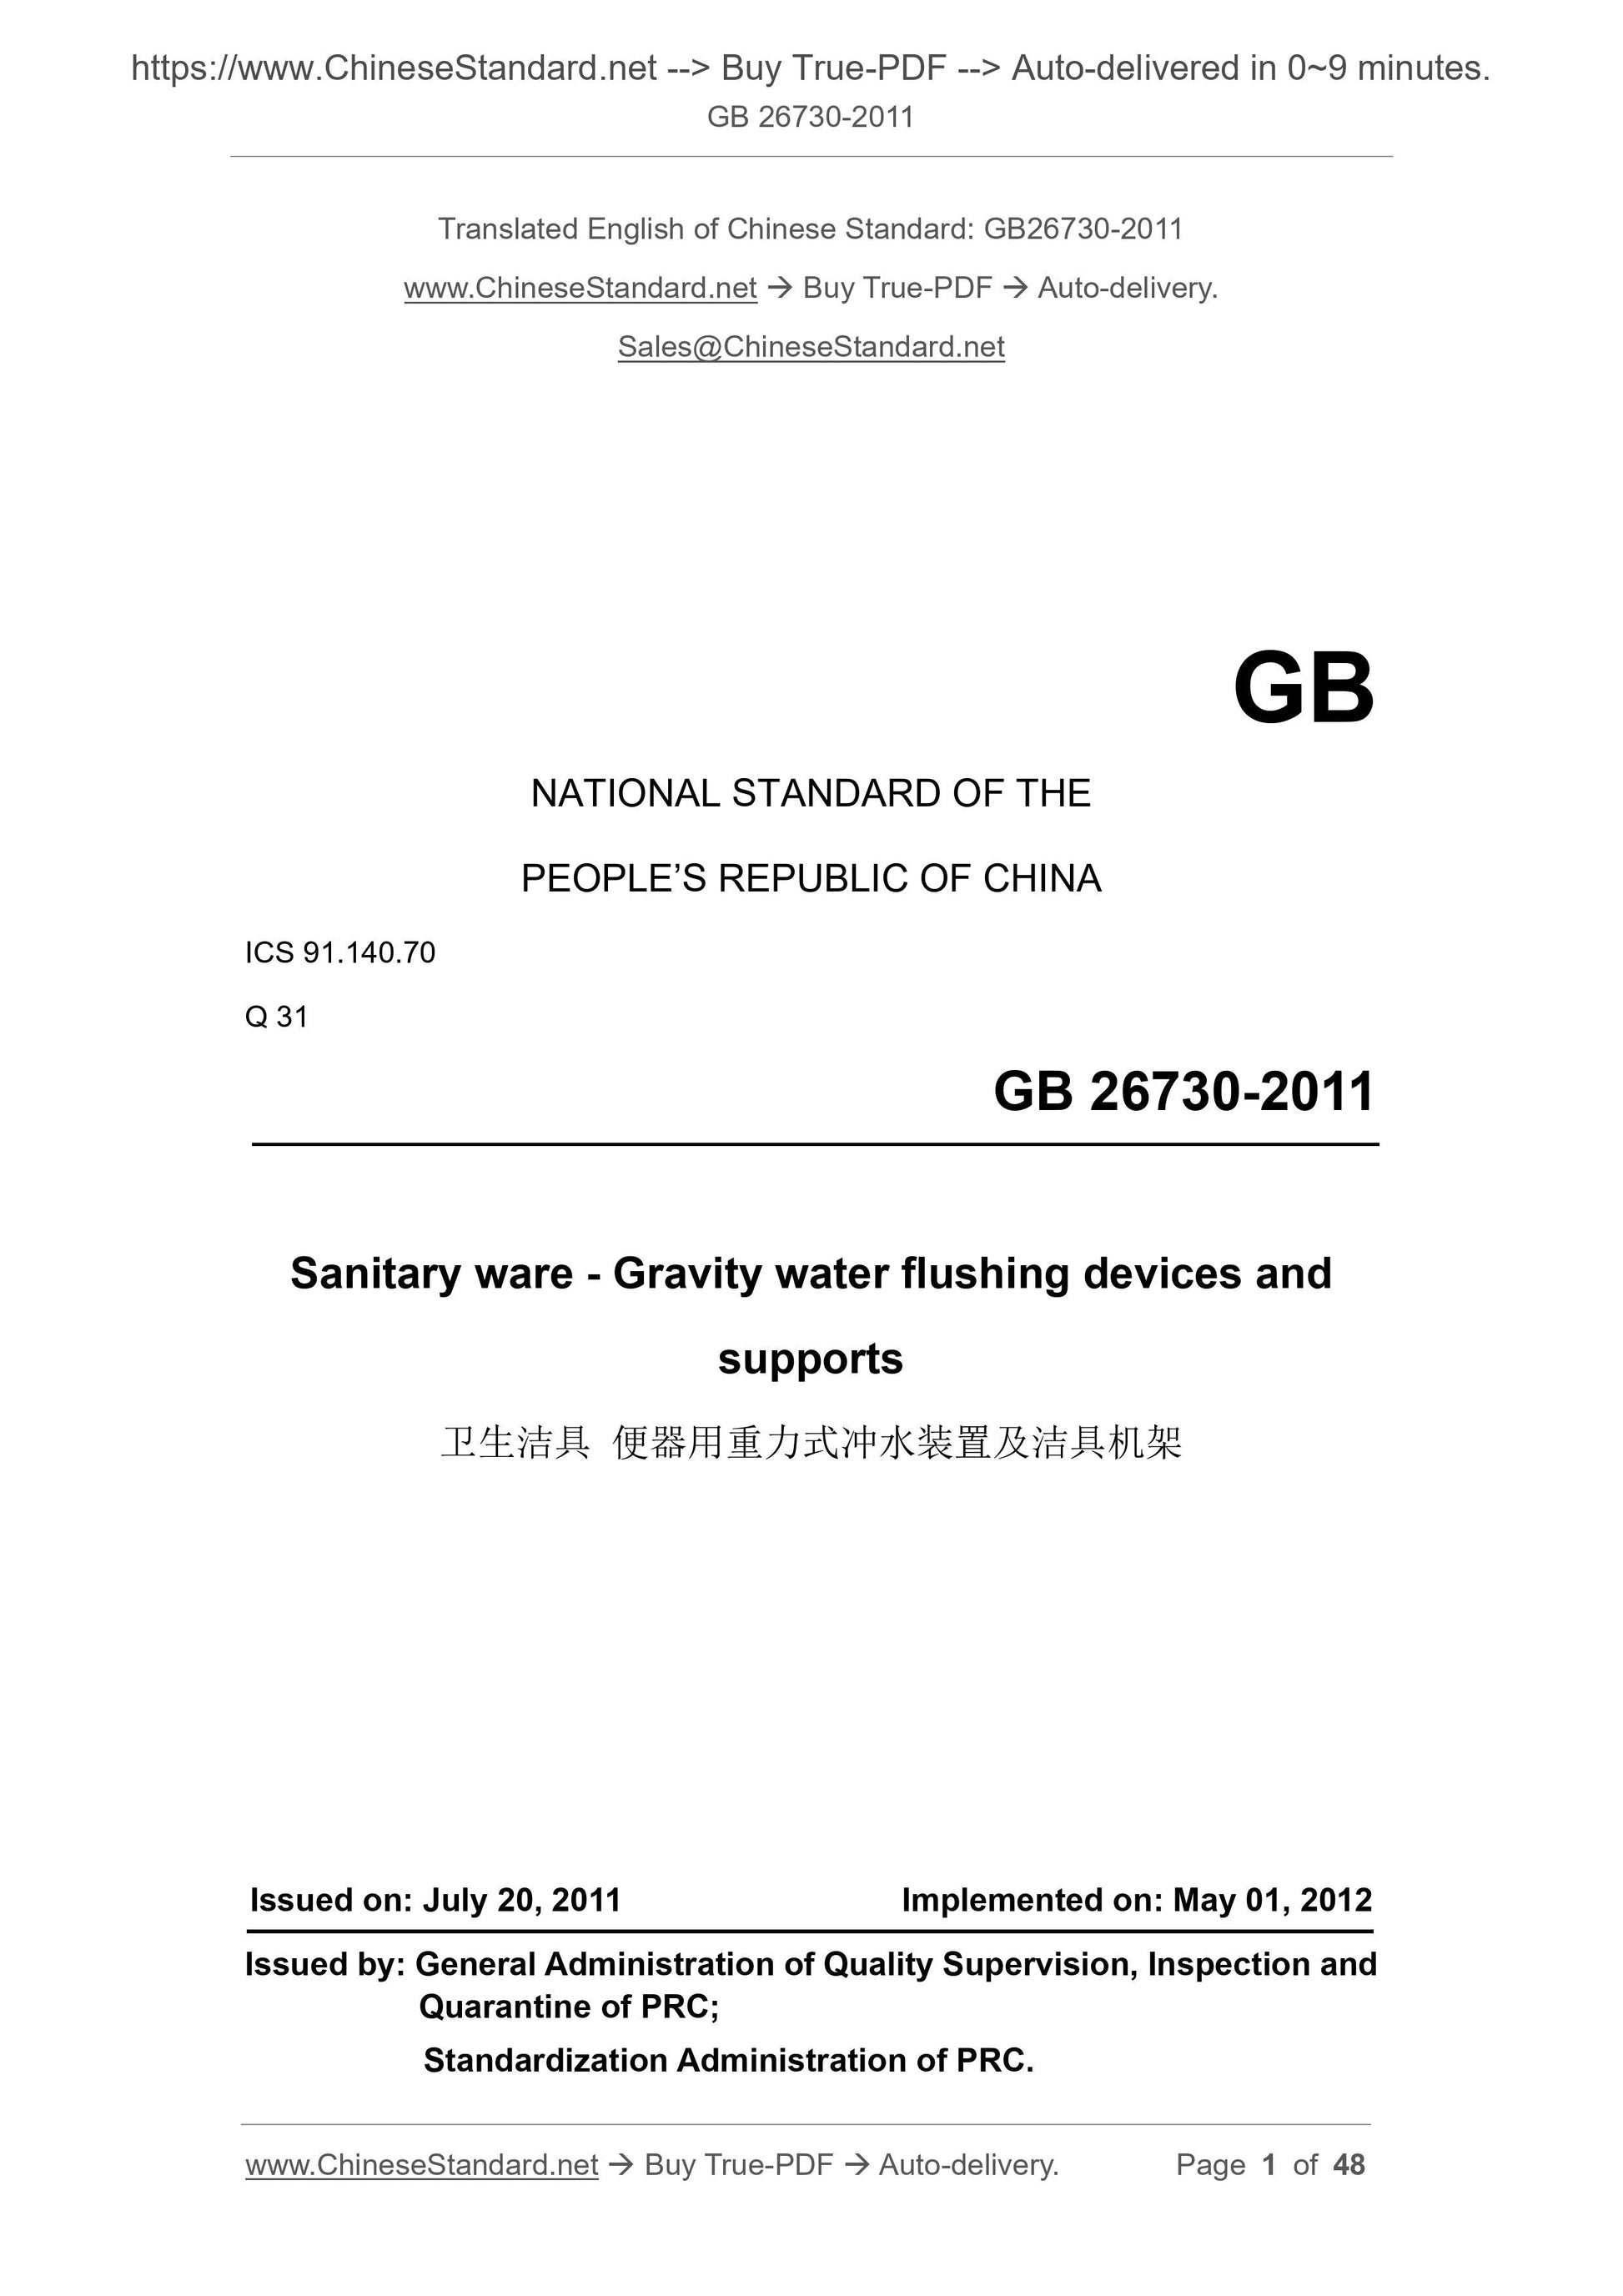 GB 26730-2011 Page 1